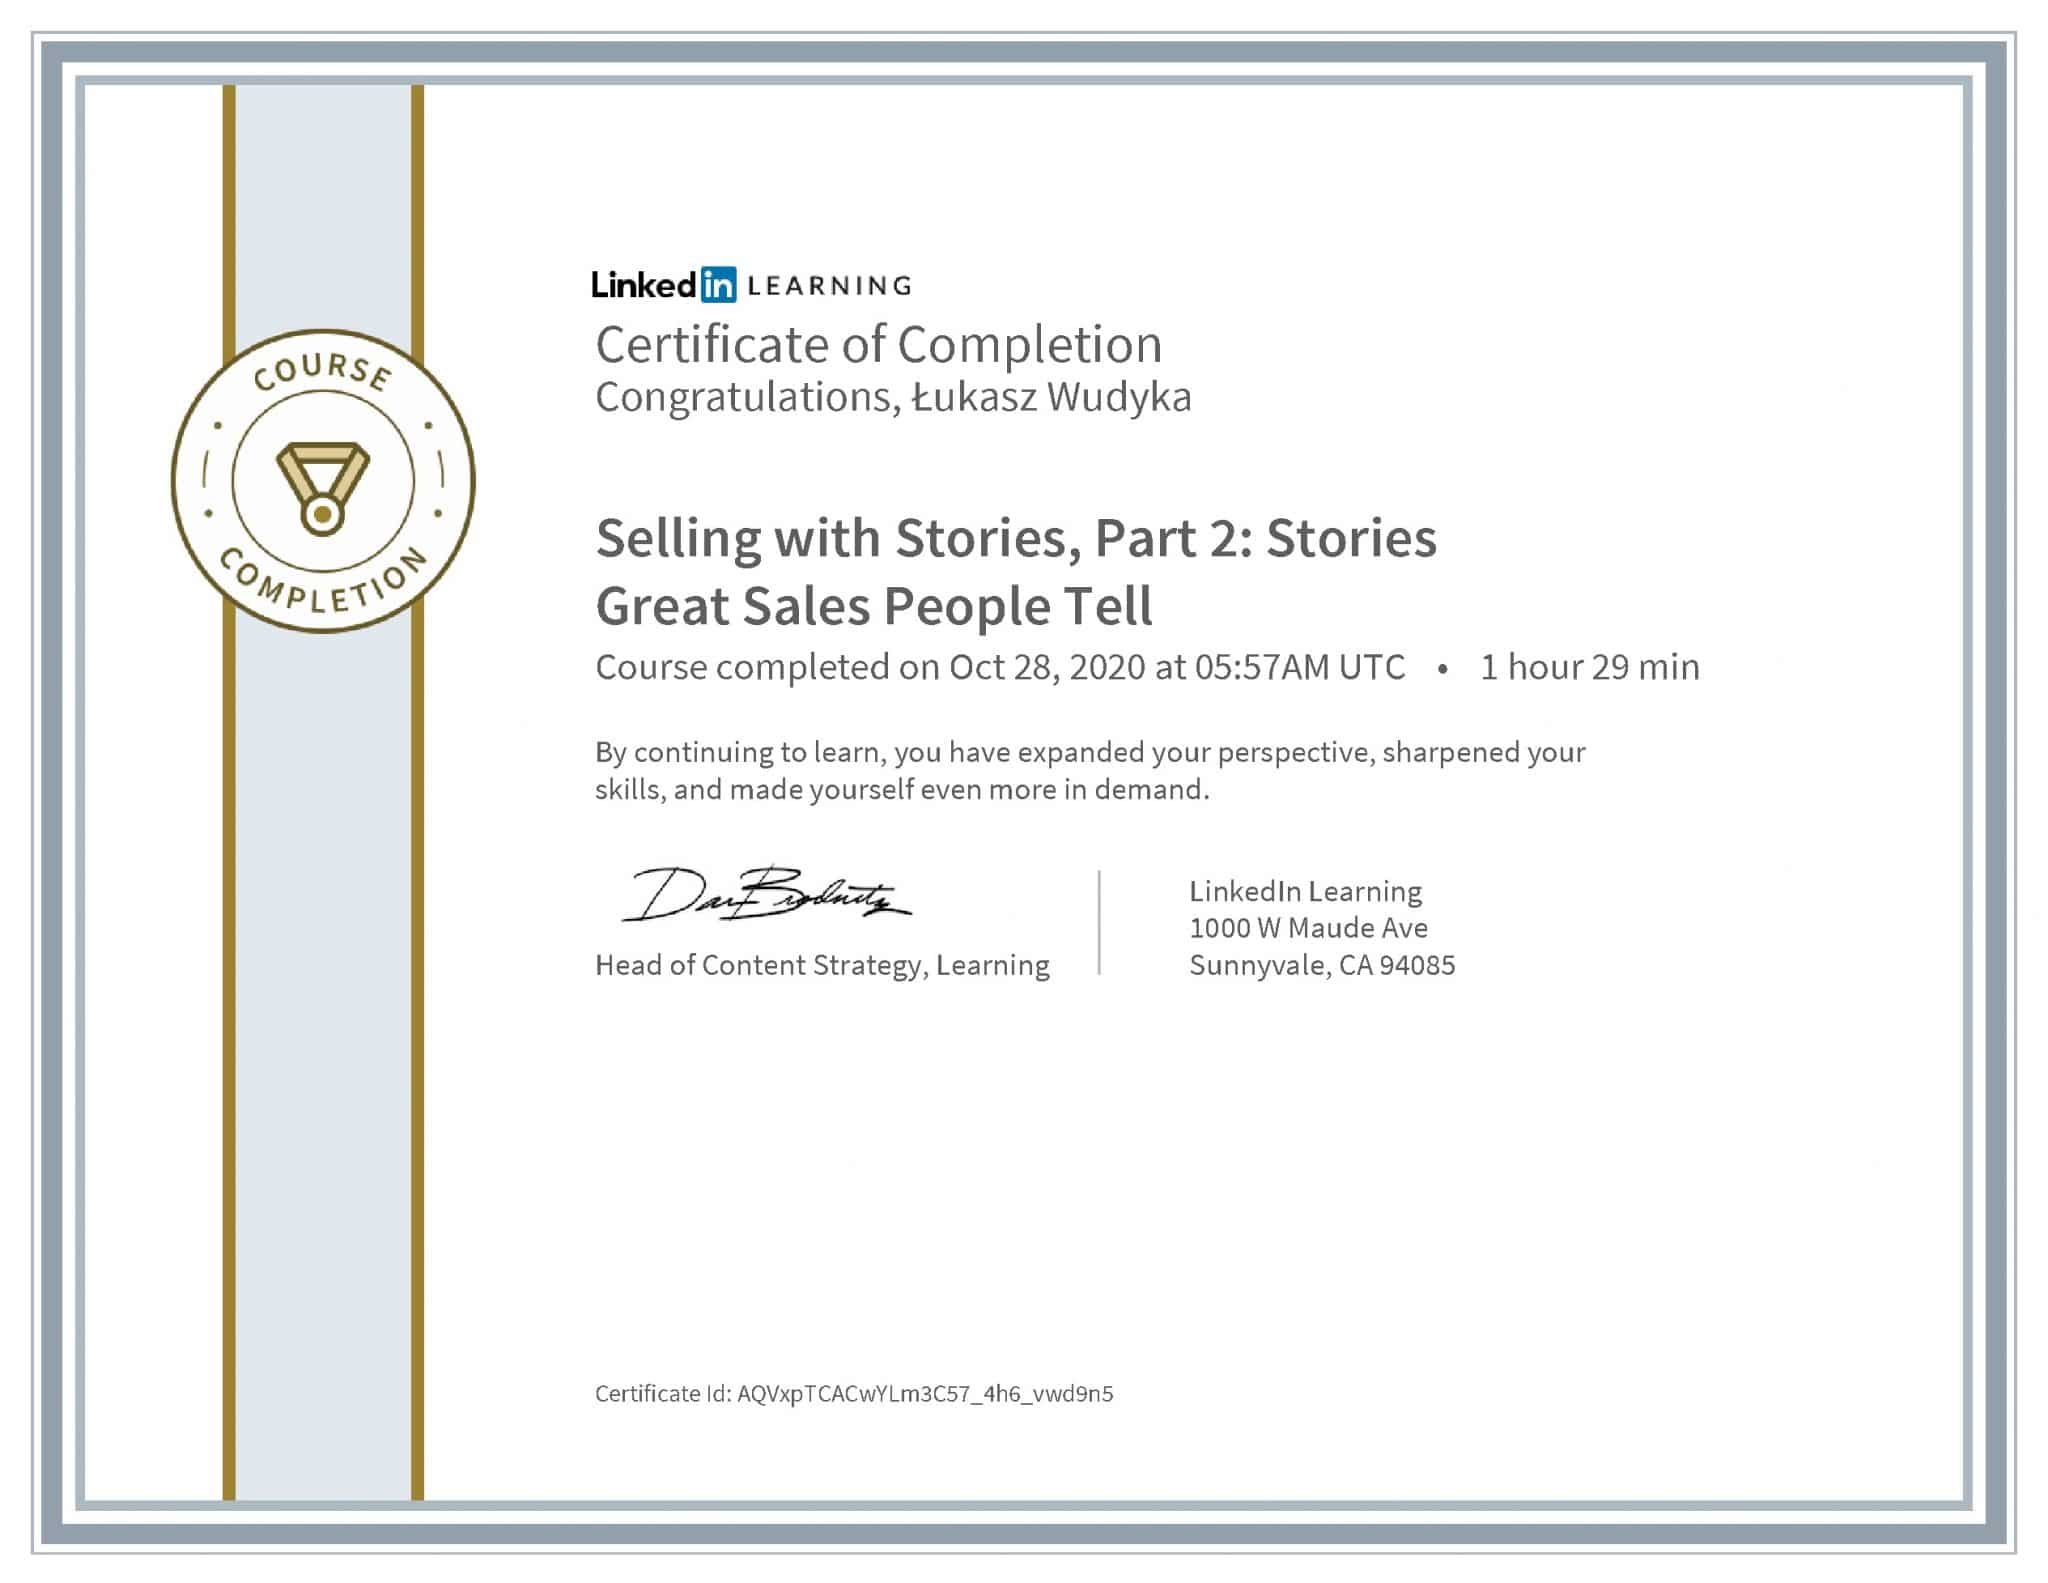 Łukasz Wudyka certyfikat LinkedIn Selling with Stories, Part 2: Stories Great Sales People Tell